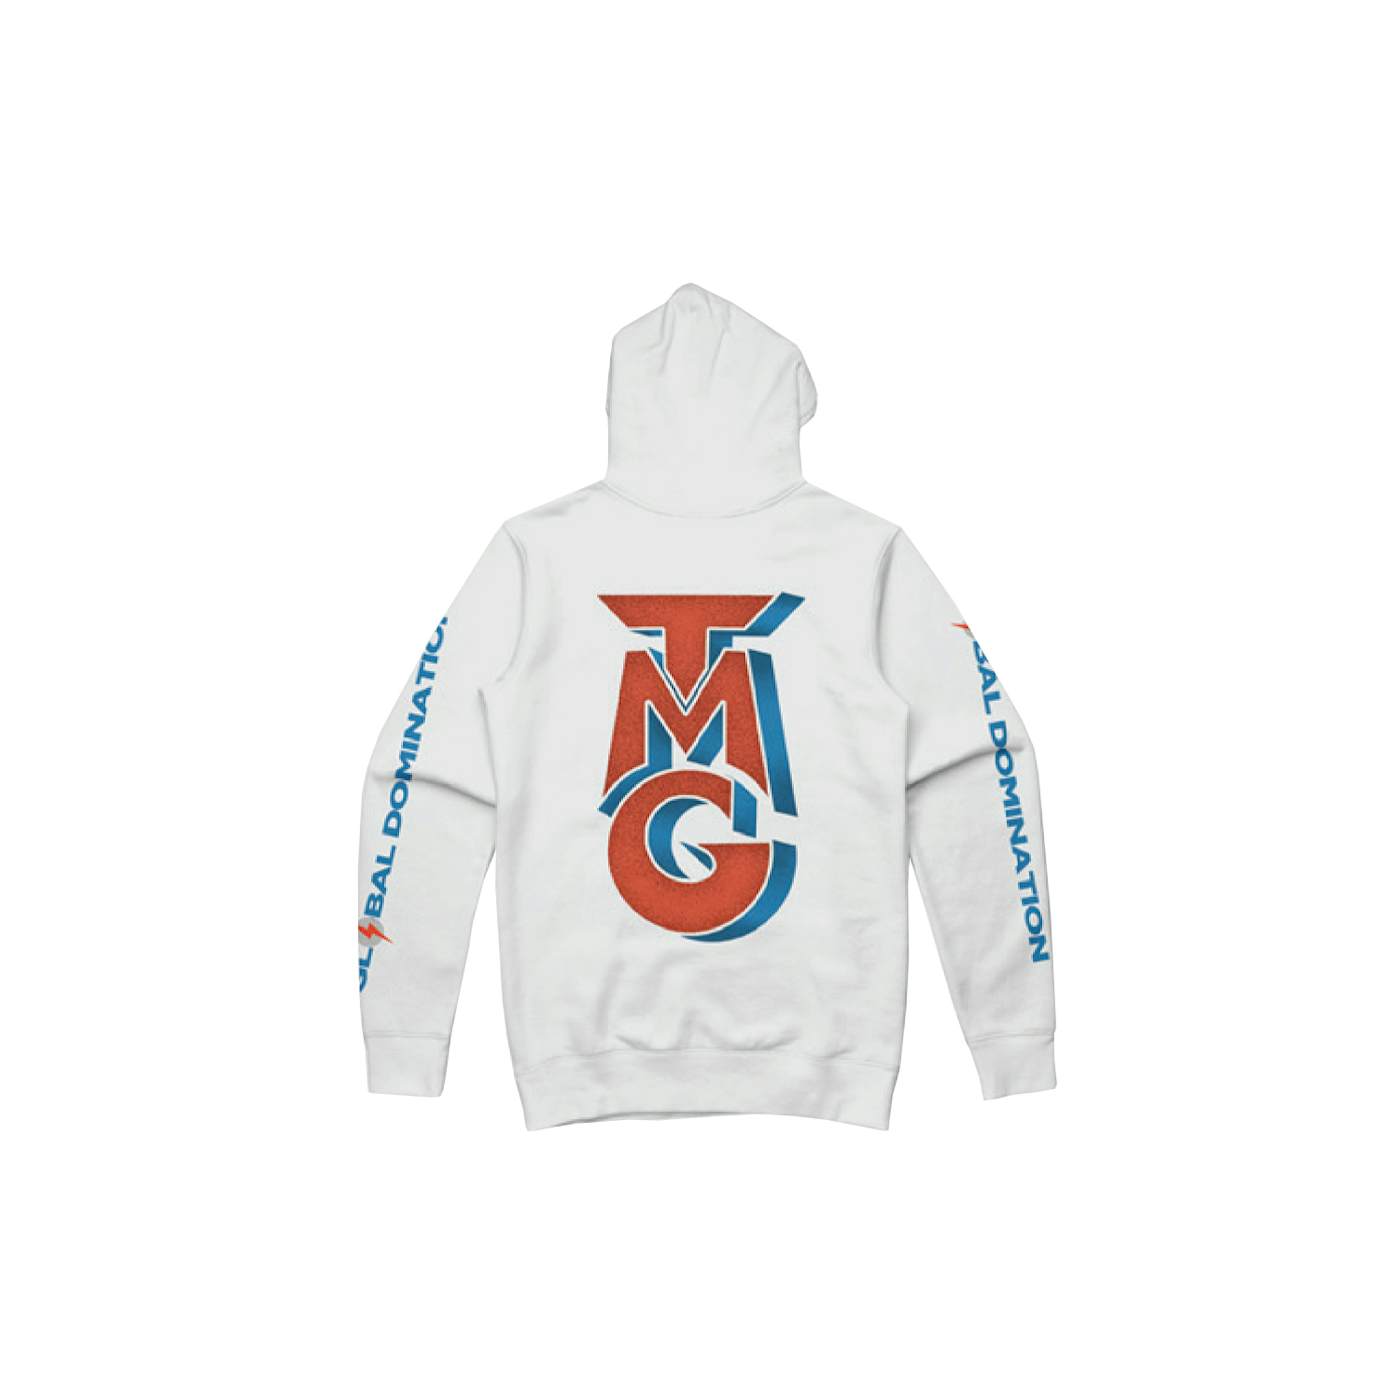 Tiny Meat Gang White Hoody